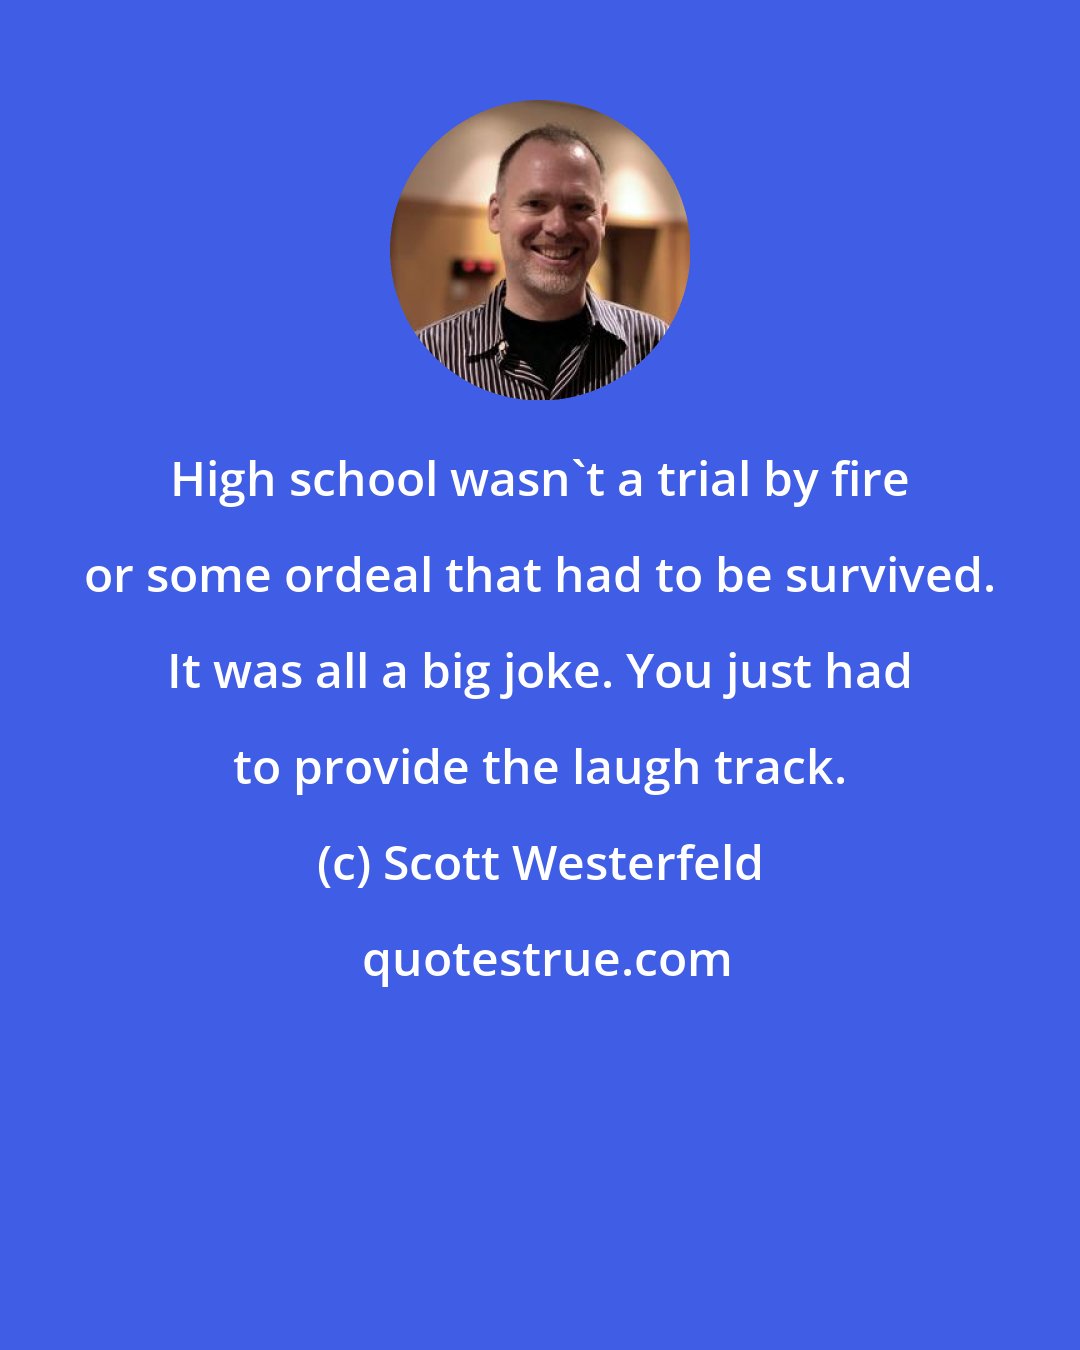 Scott Westerfeld: High school wasn't a trial by fire or some ordeal that had to be survived. It was all a big joke. You just had to provide the laugh track.